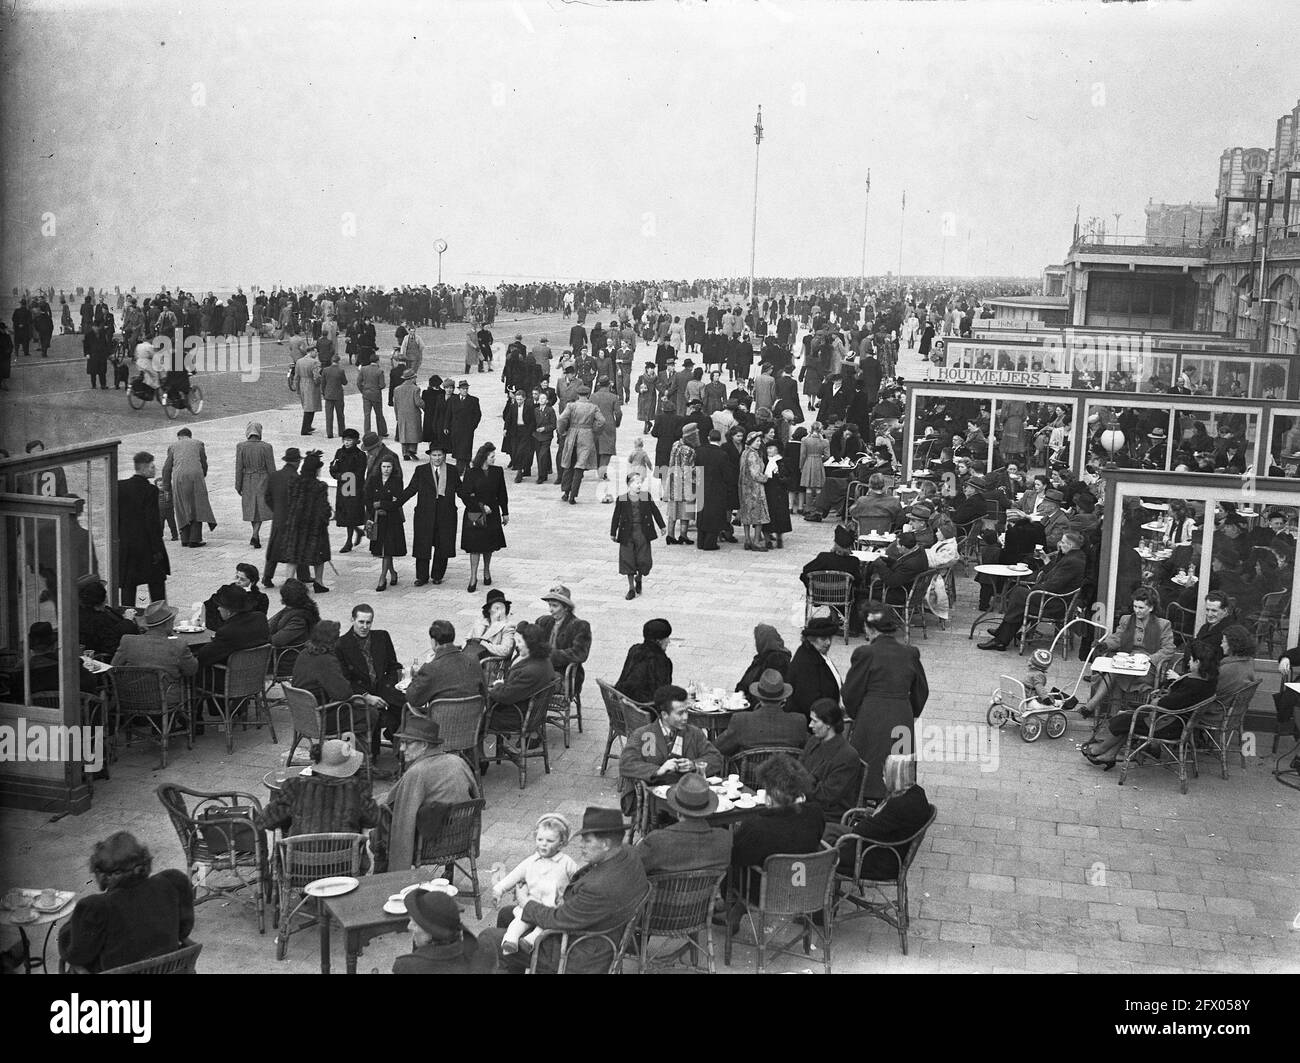 Scheveningen against spring weather 29-2-1948, February 26, 1948, The Netherlands, 20th century press agency photo, news to remember, documentary, historic photography 1945-1990, visual stories, human history of the Twentieth Century, capturing moments in time Stock Photo